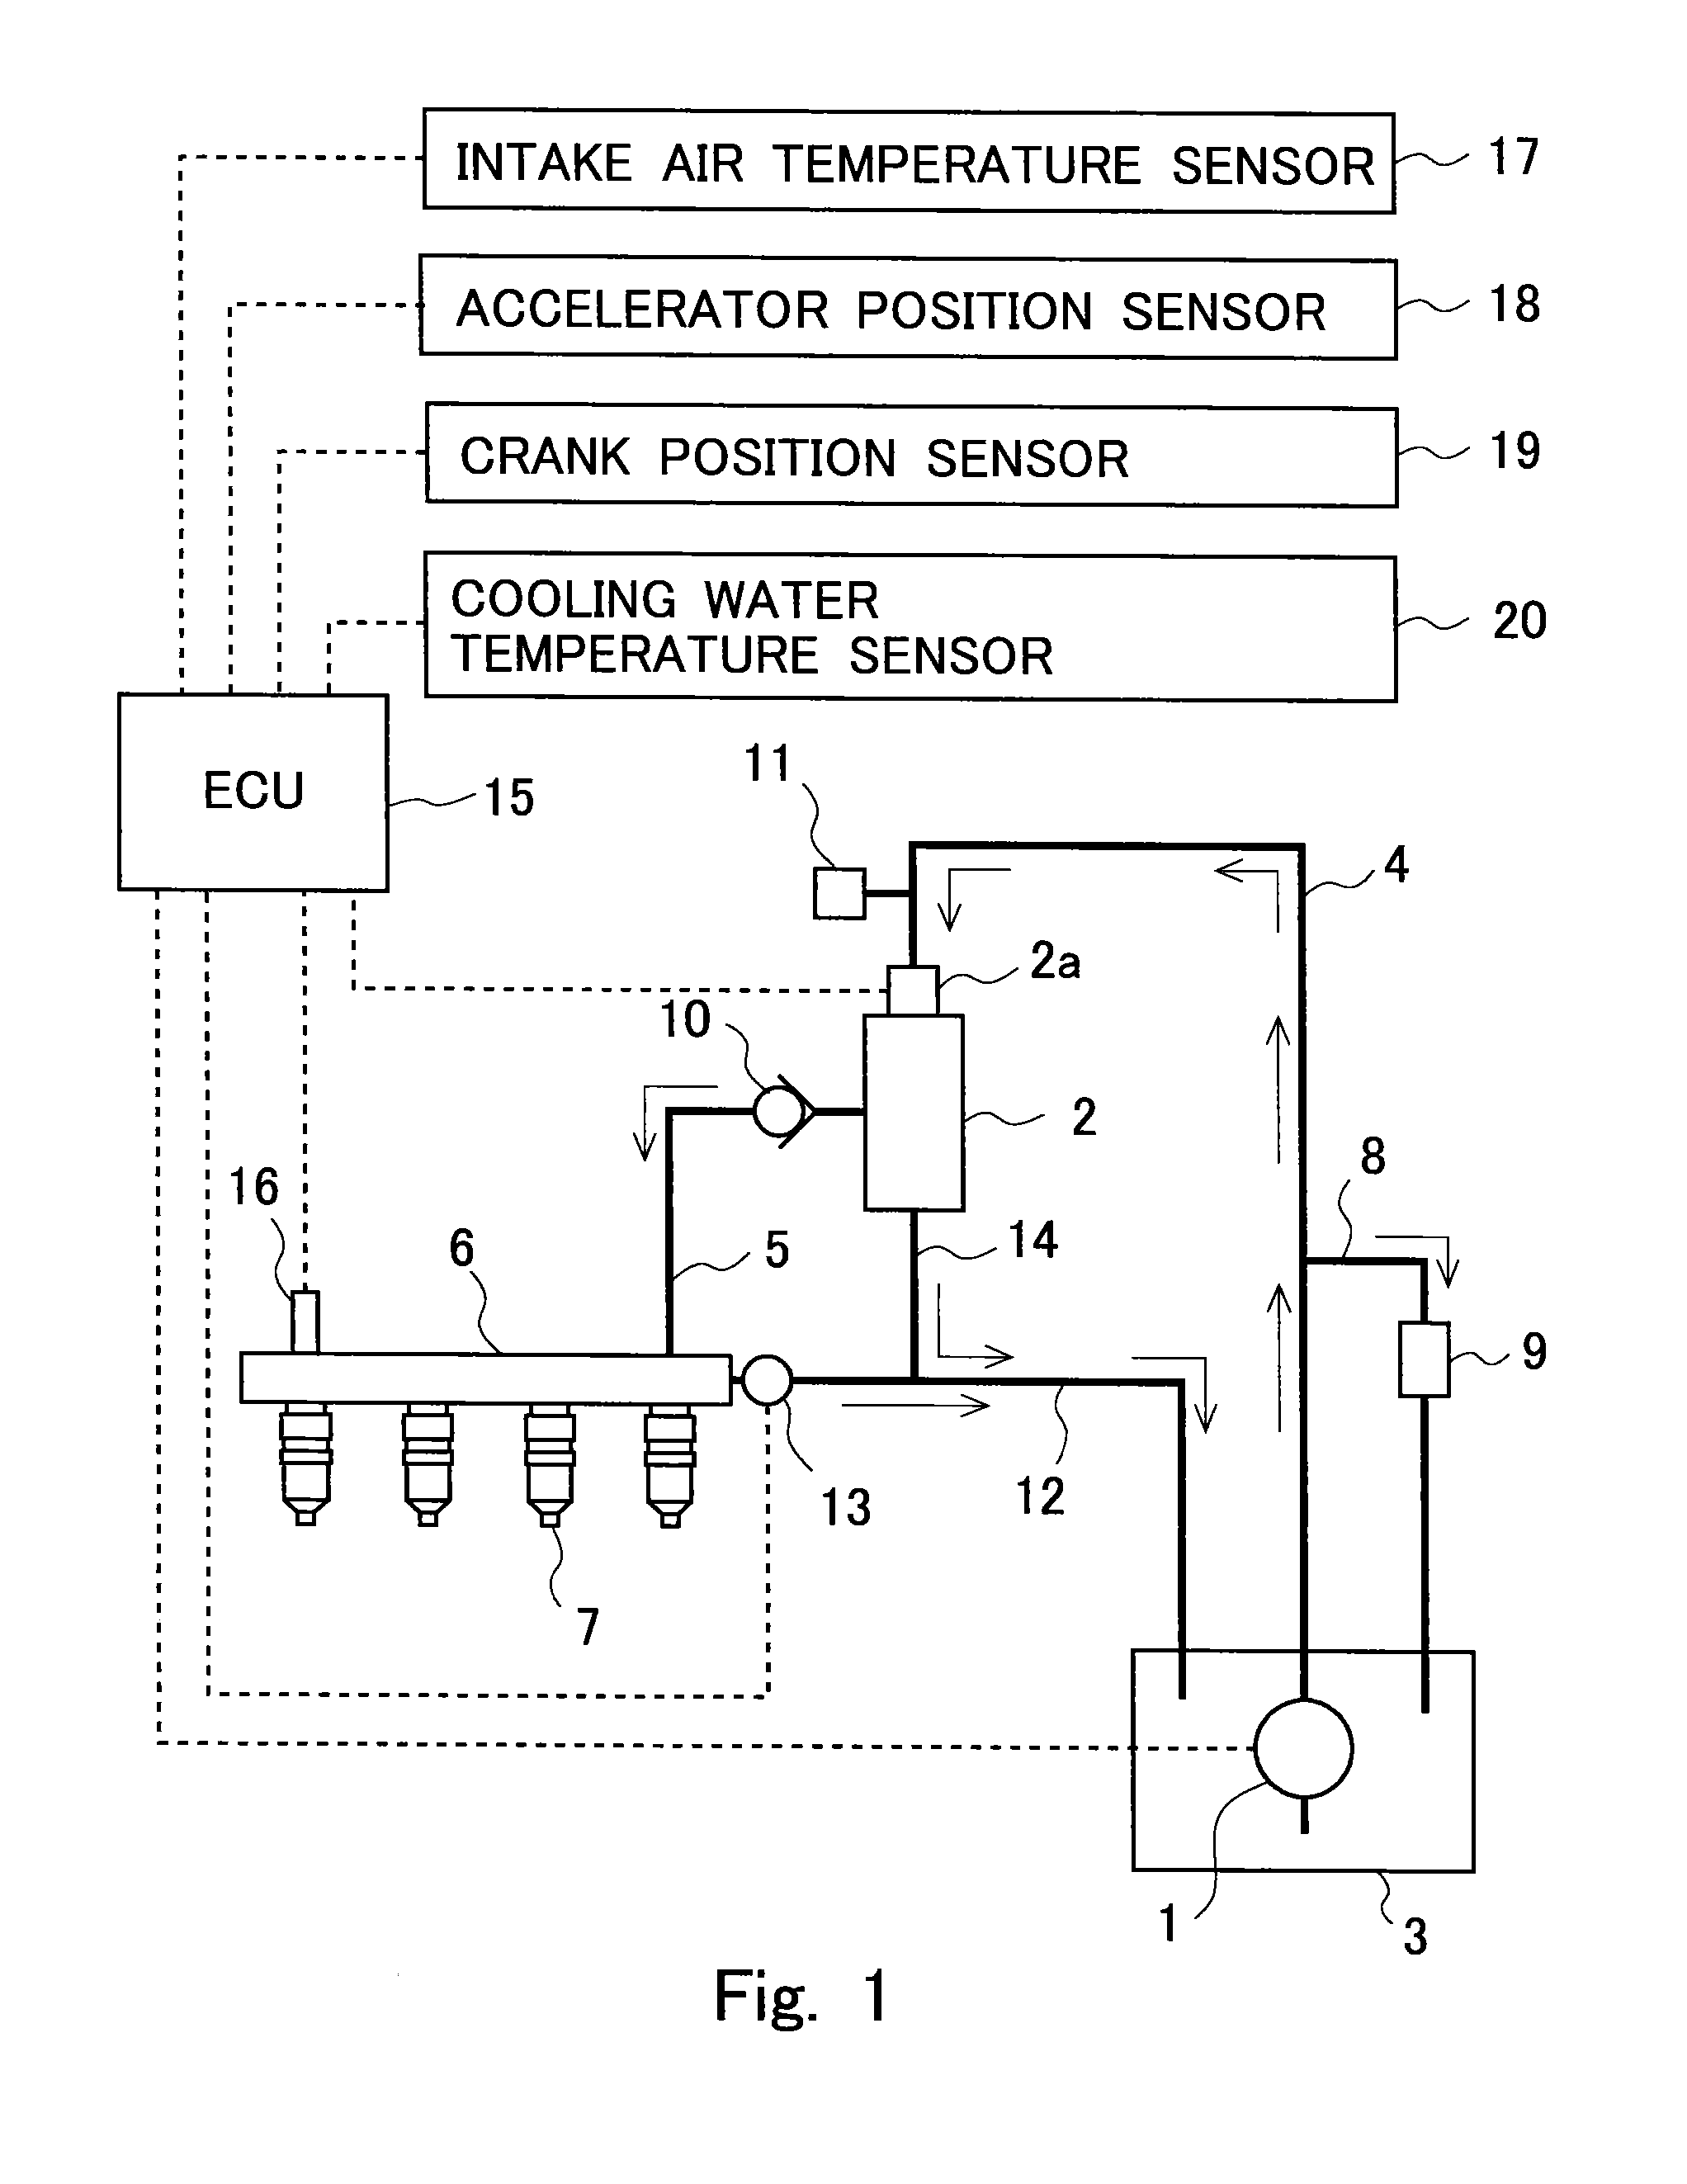 Fuel injection control system for an internal combustion engine